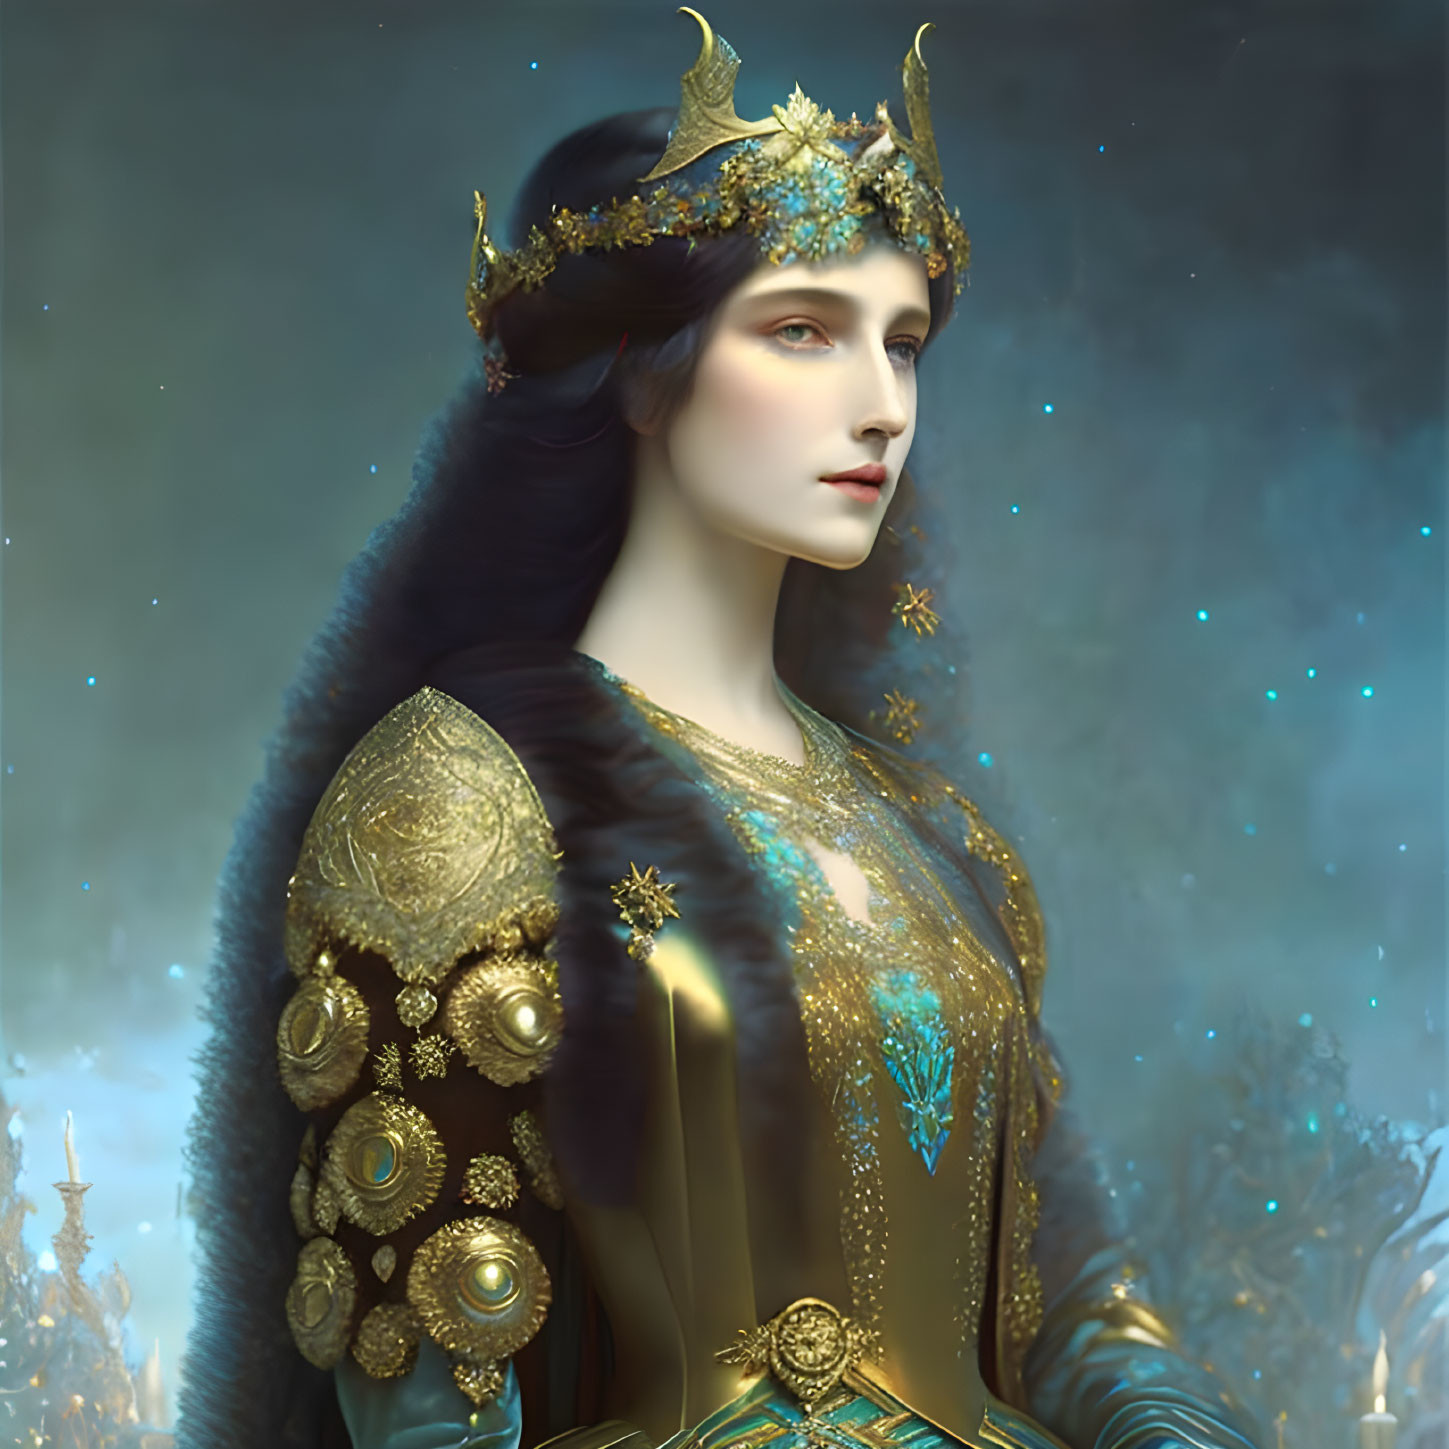 Regal figure in golden crown and ornate armor on magical background